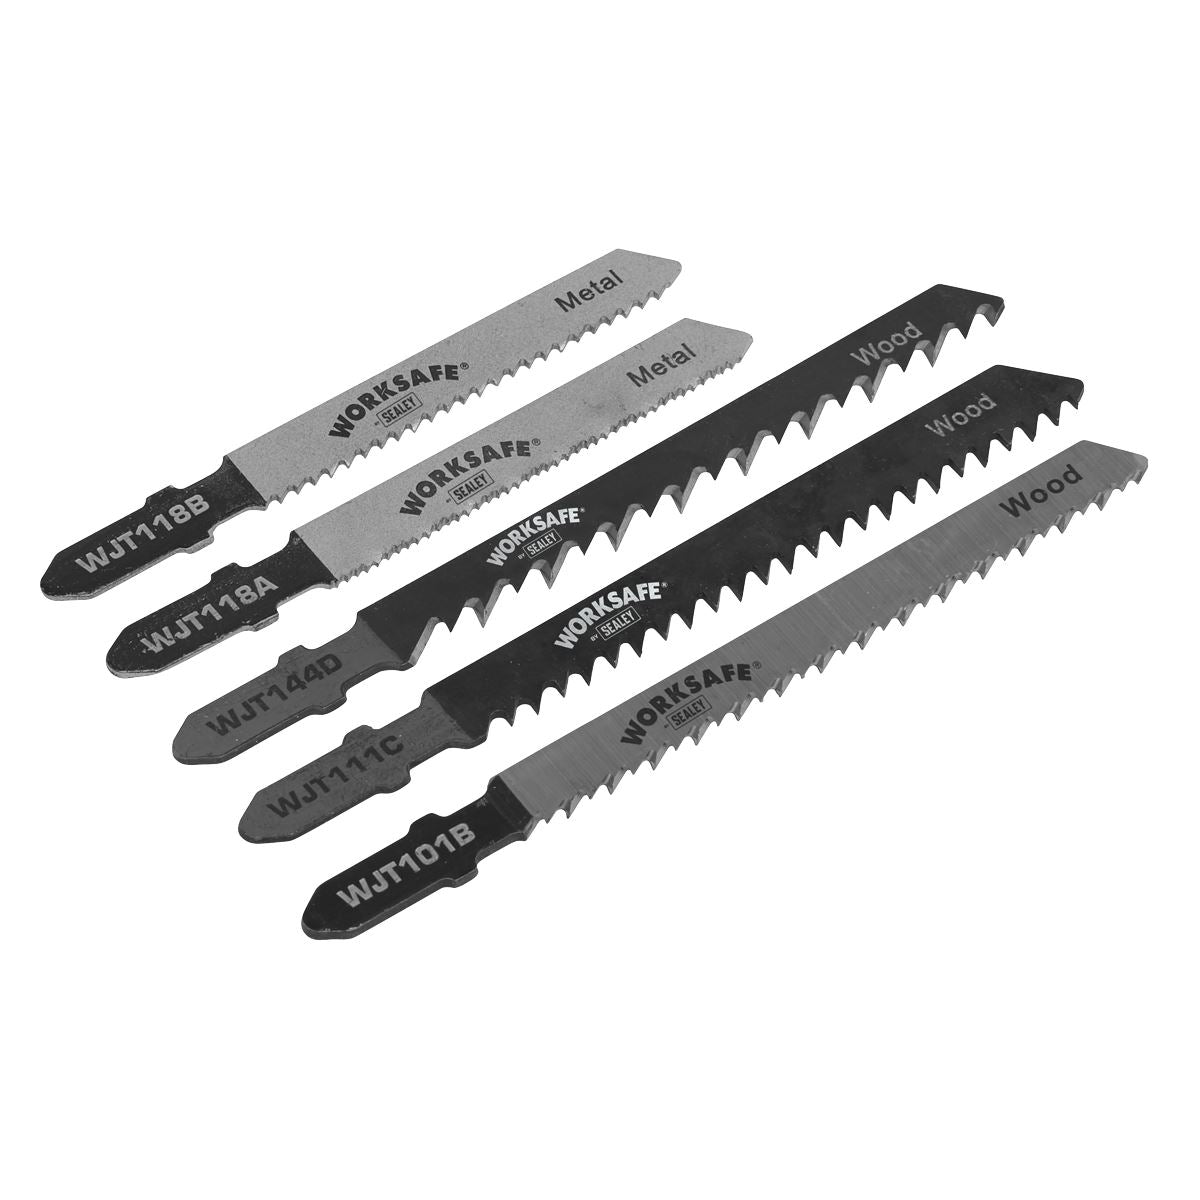 Worksafe by Sealey Assorted Jigsaw Blades - Pack of 5